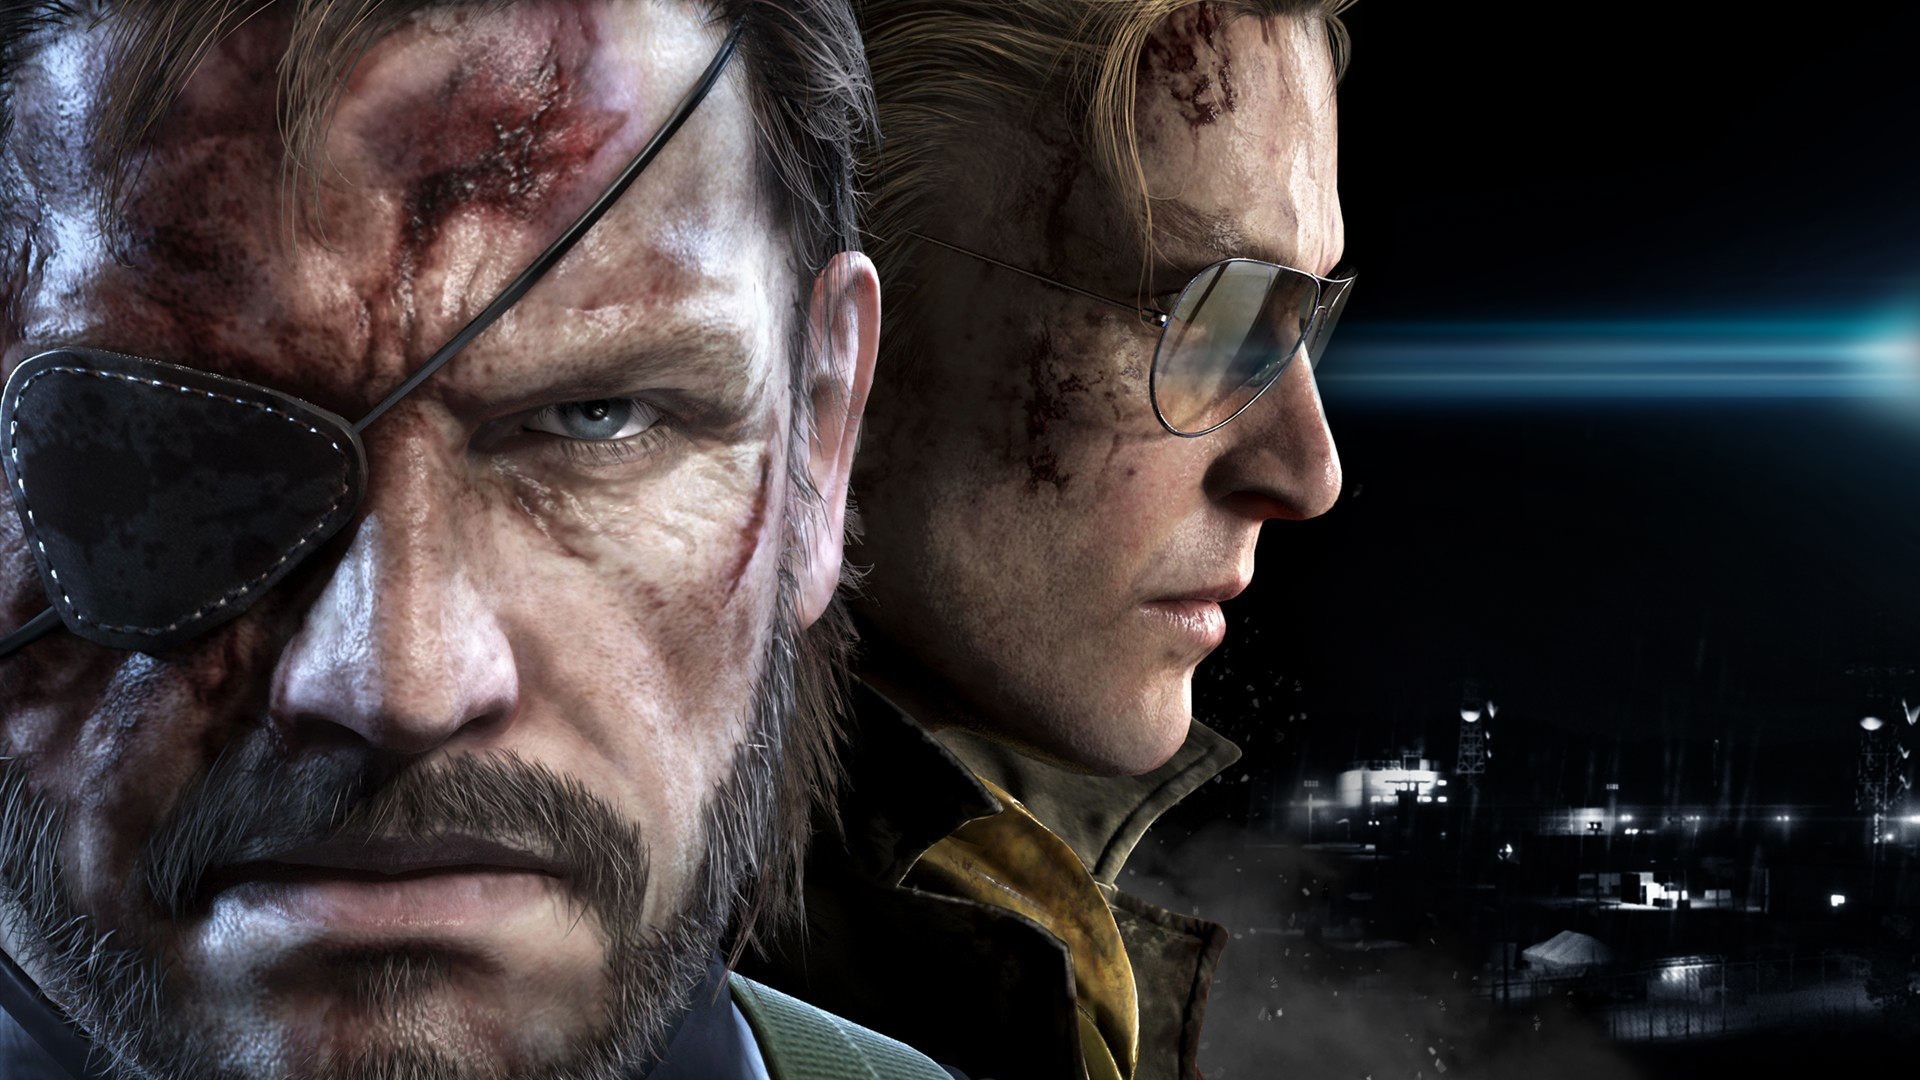 1920x1080 ... Wallpaper Metal Gear Solid V: The Phantom Pain HD pictures